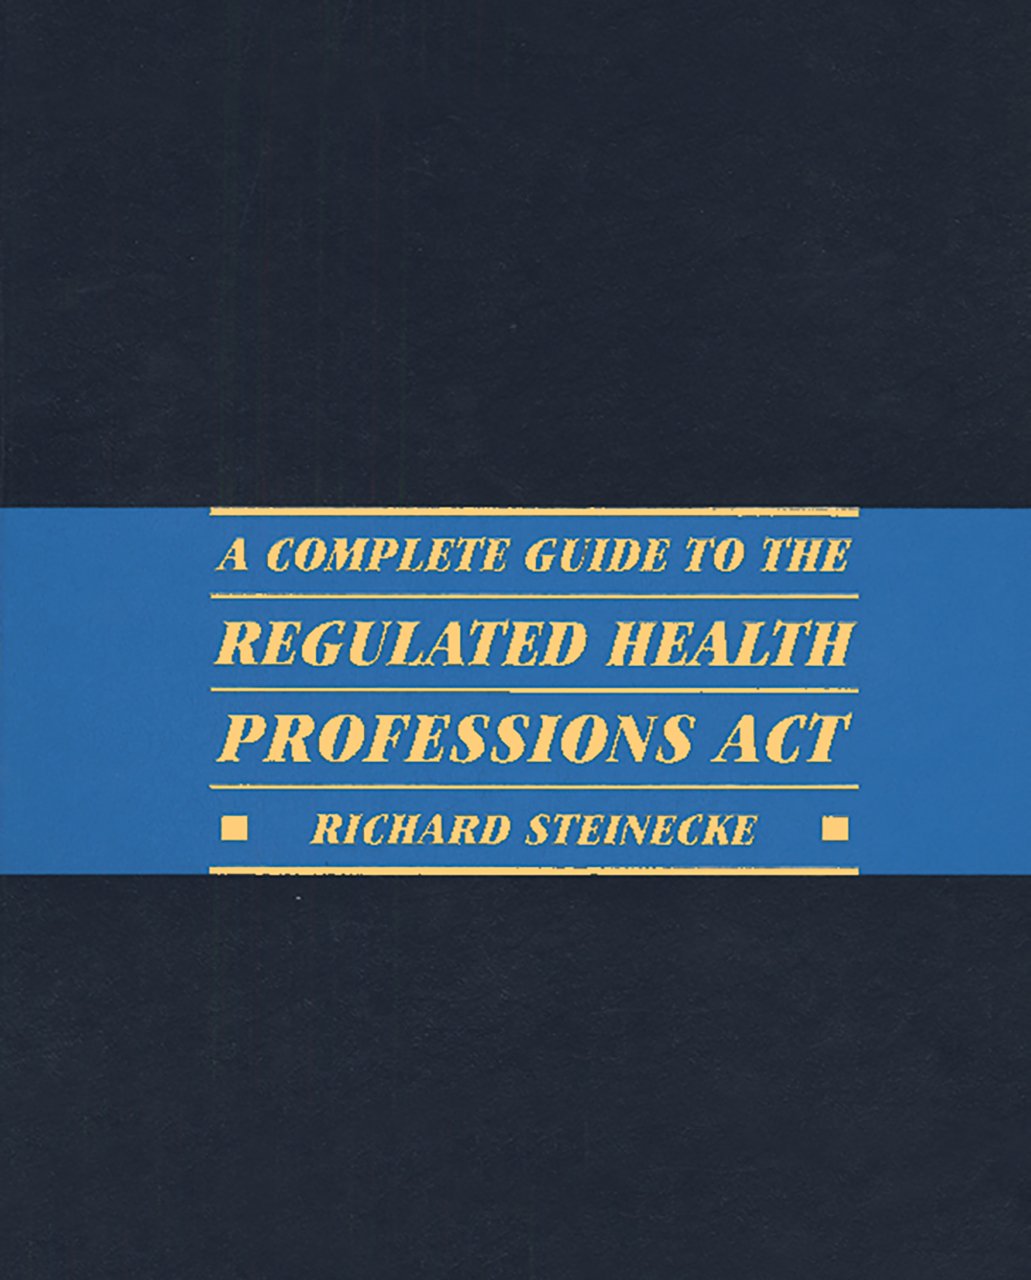 A Complete Guide to the Regulated Health Professions Act - Book image